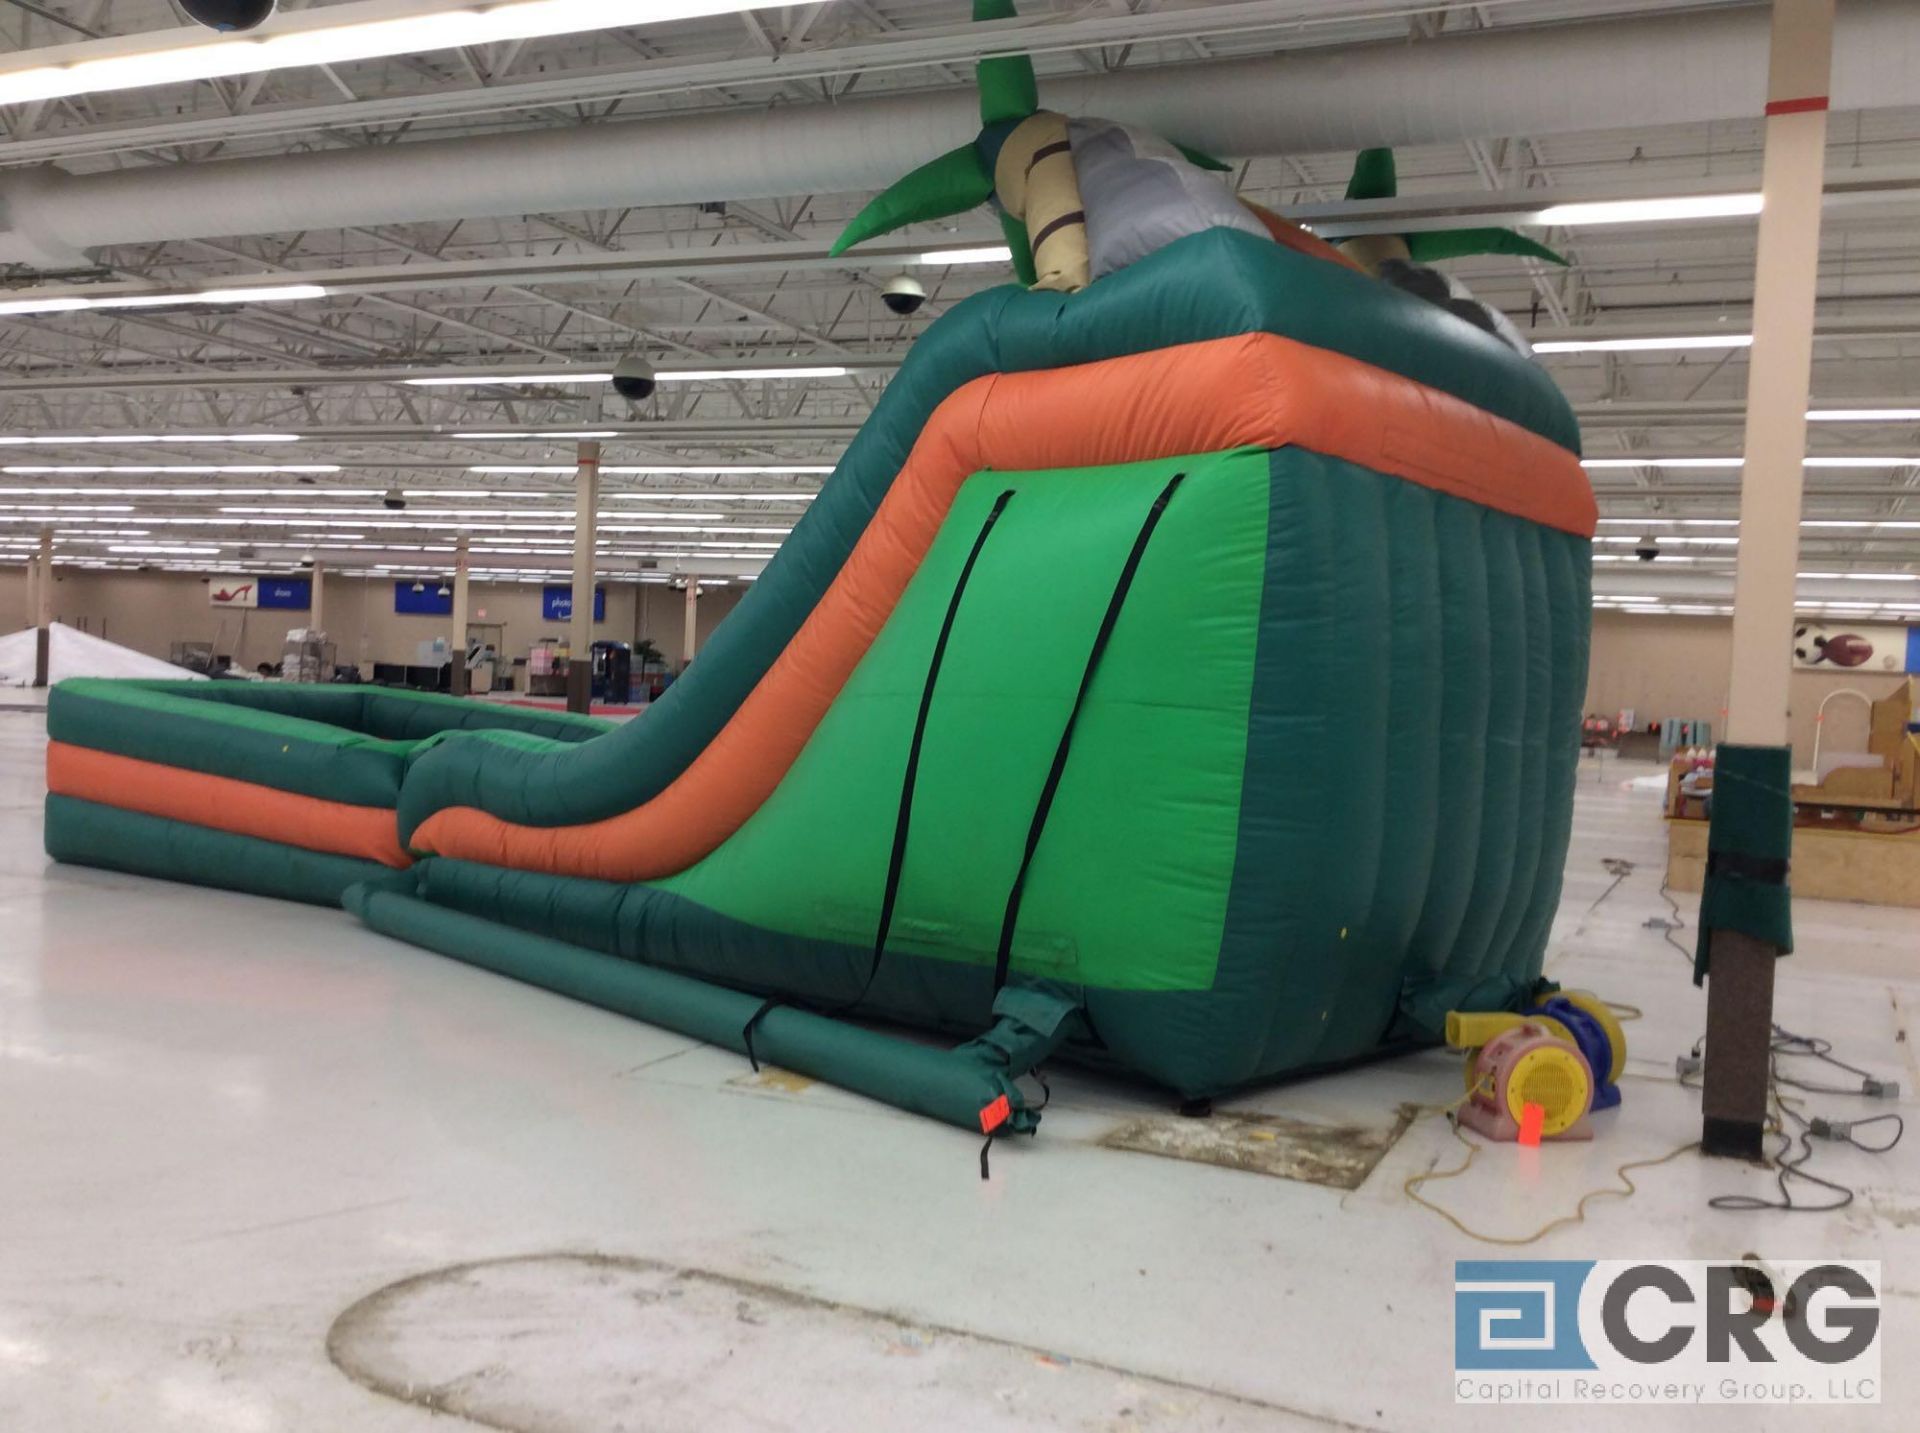 Water Slide, 2 piece, Inflatable bounce house, blower NOT included. - Image 4 of 4